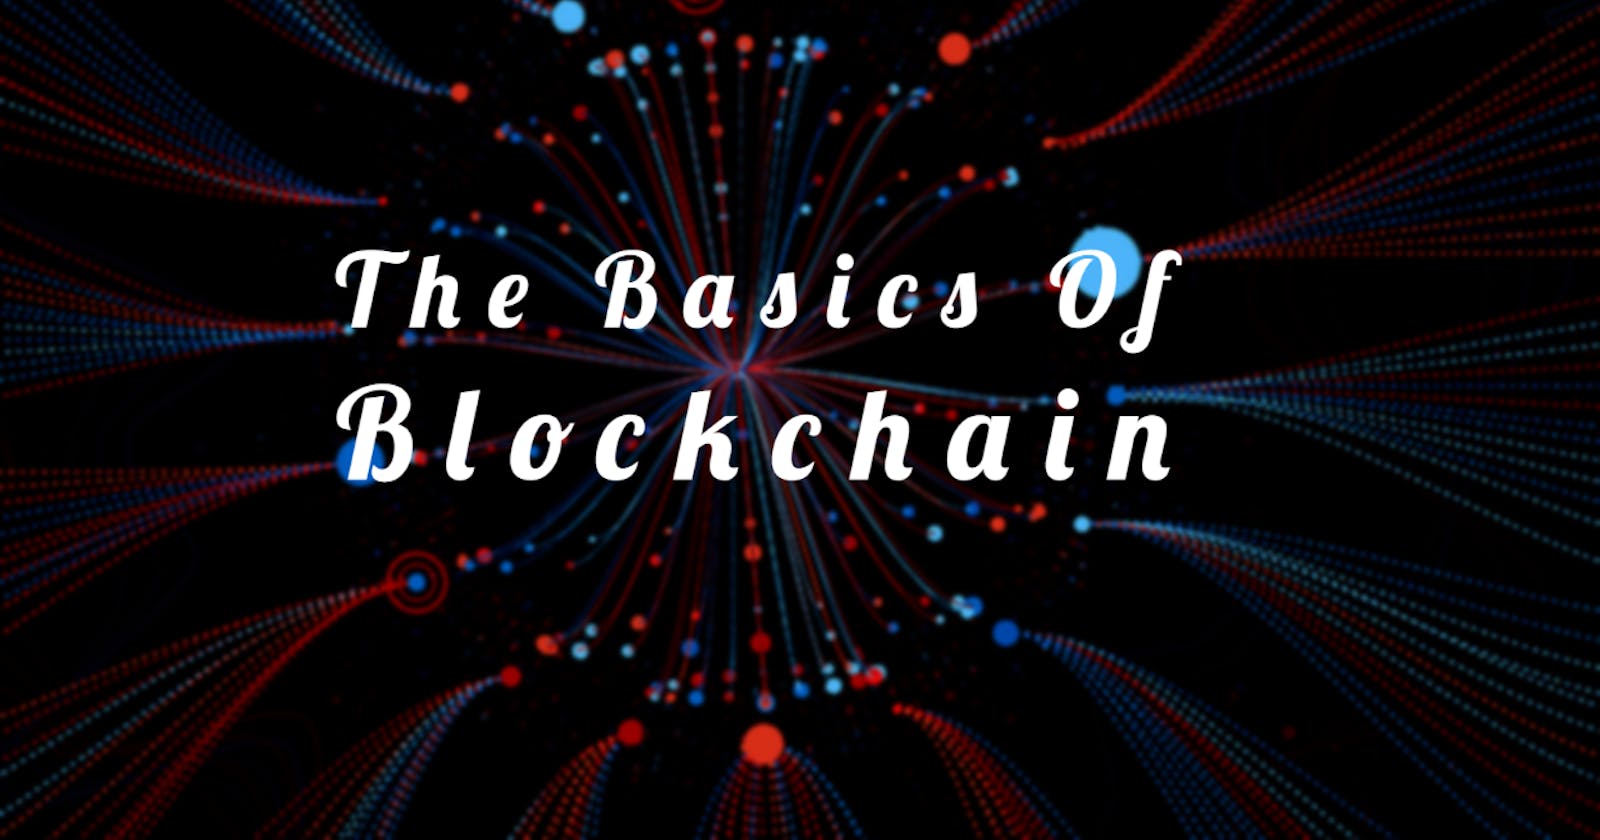 The basics of blockchain : what is blockchain, how to they work and what are their potential applications?